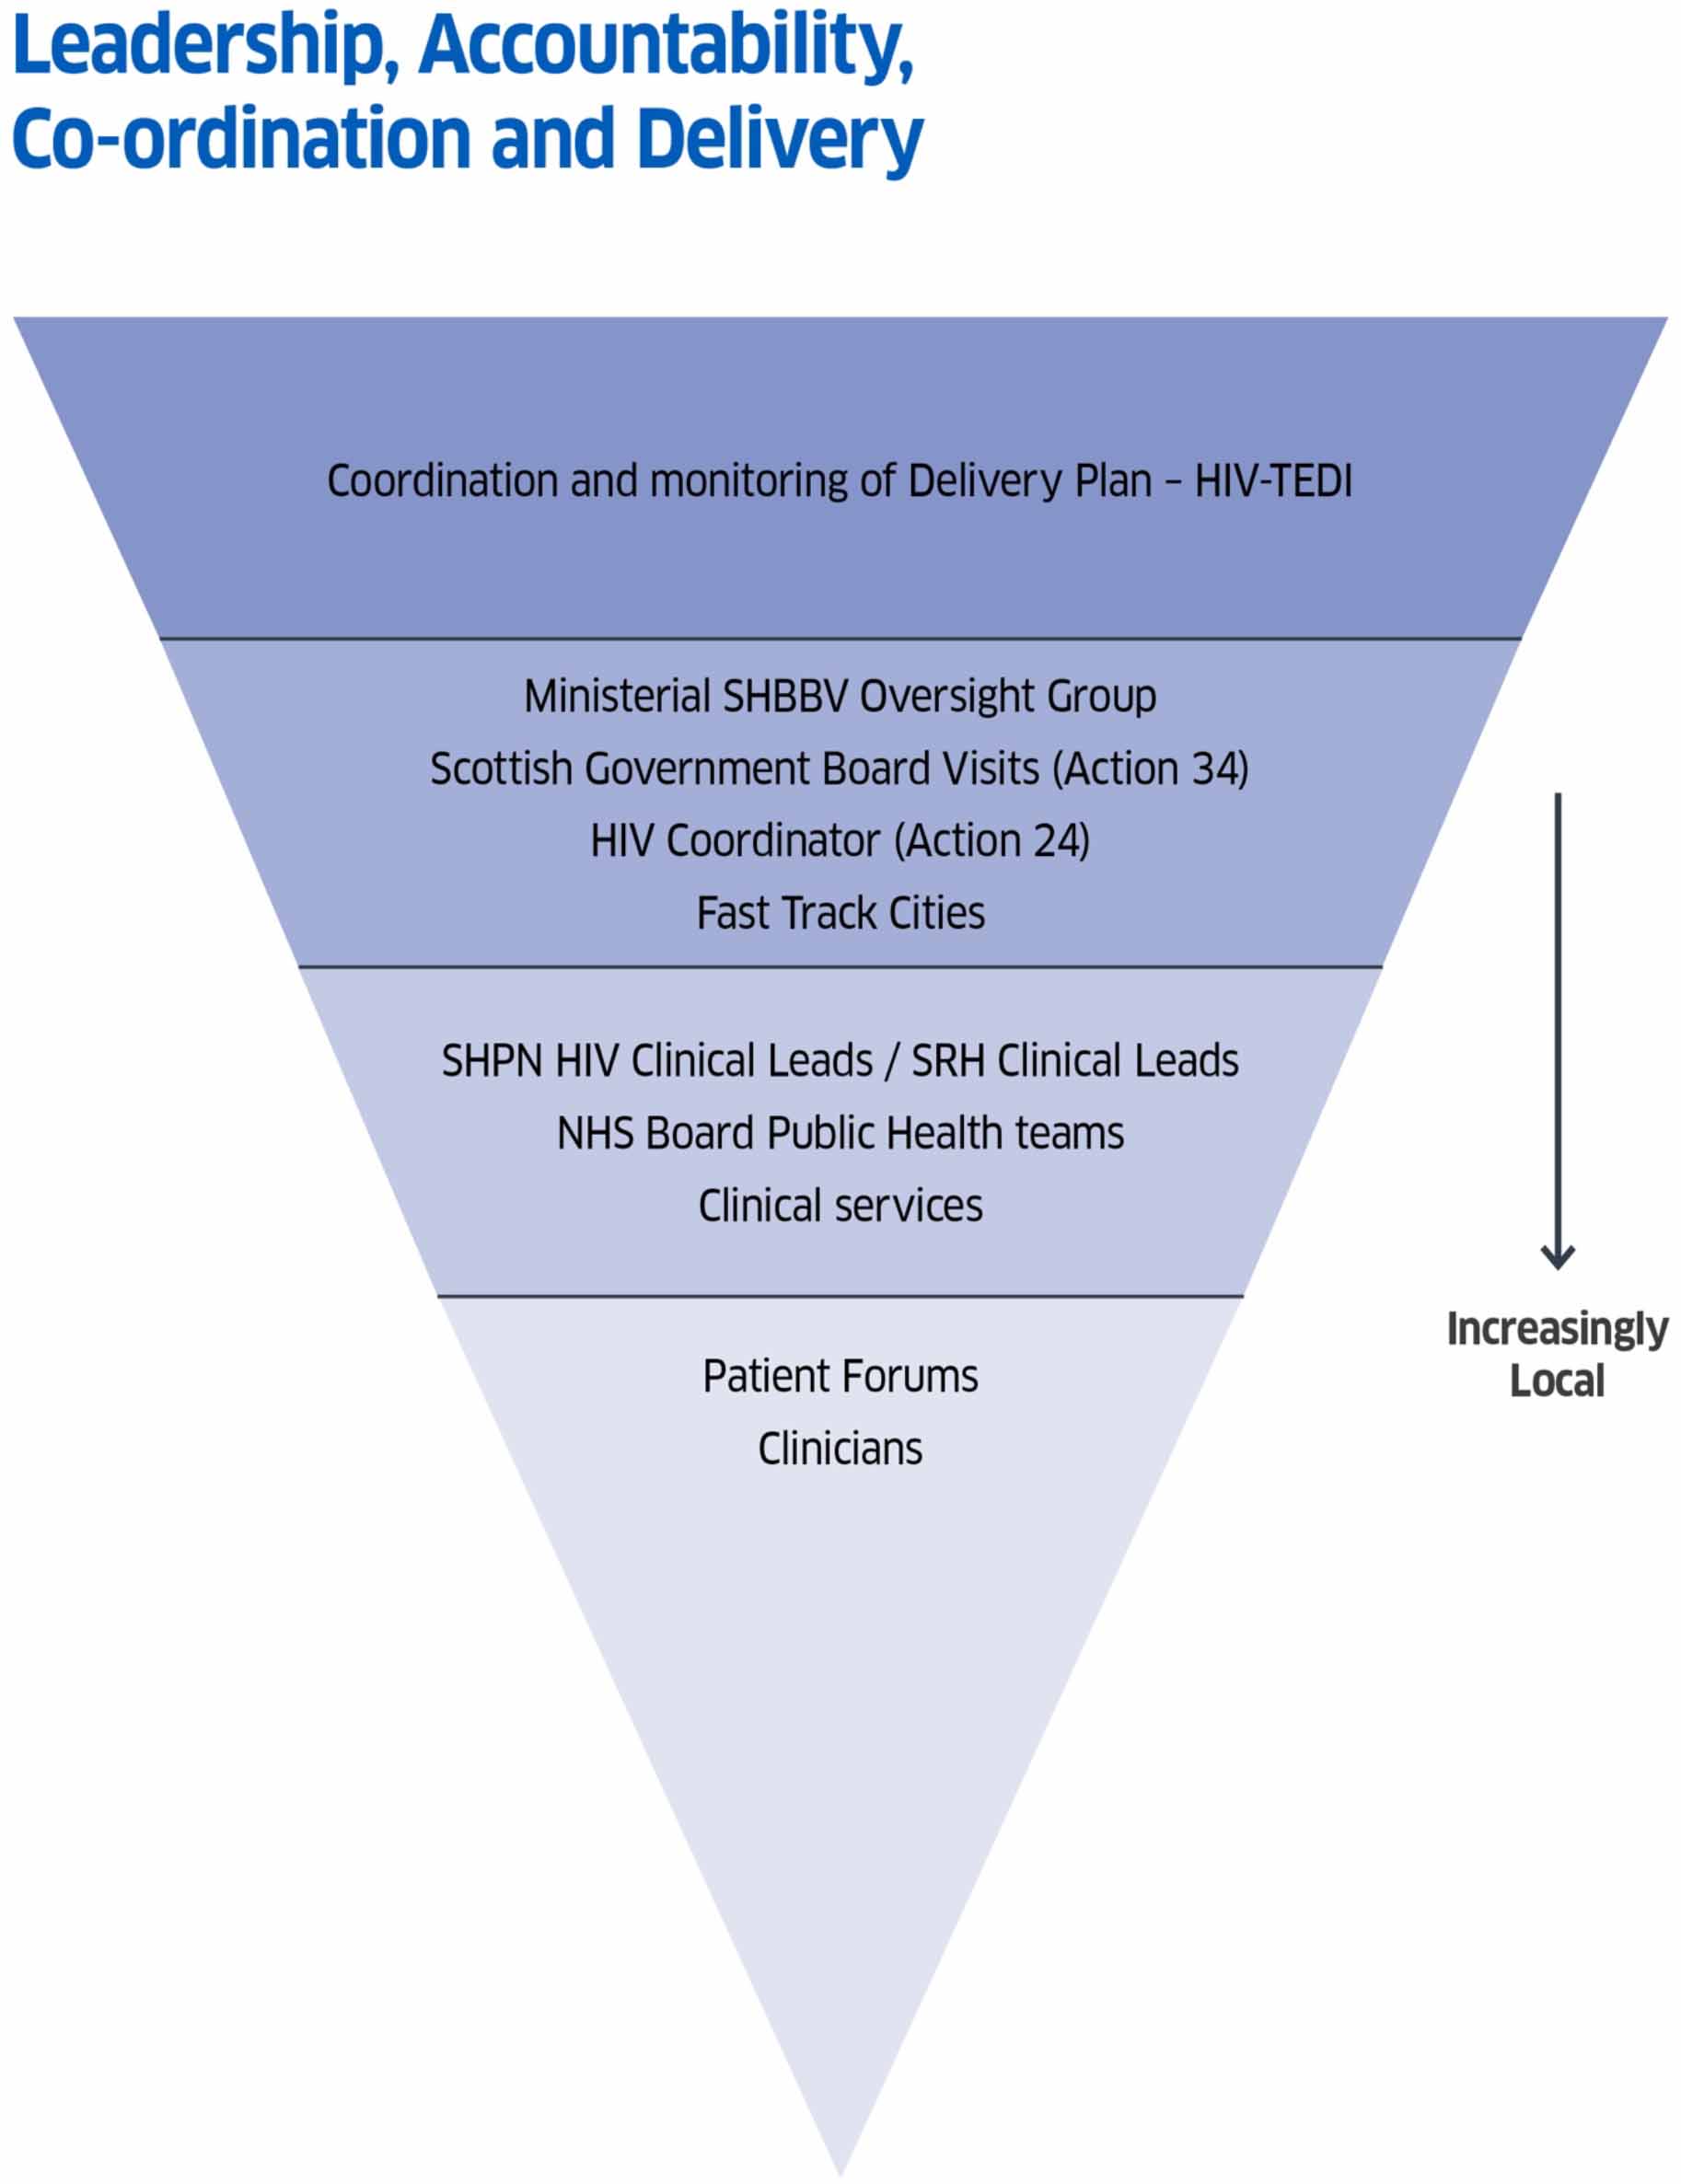 An inverted triangle showing the Leadership, accountability, coordination and delivery actions as incidence declines